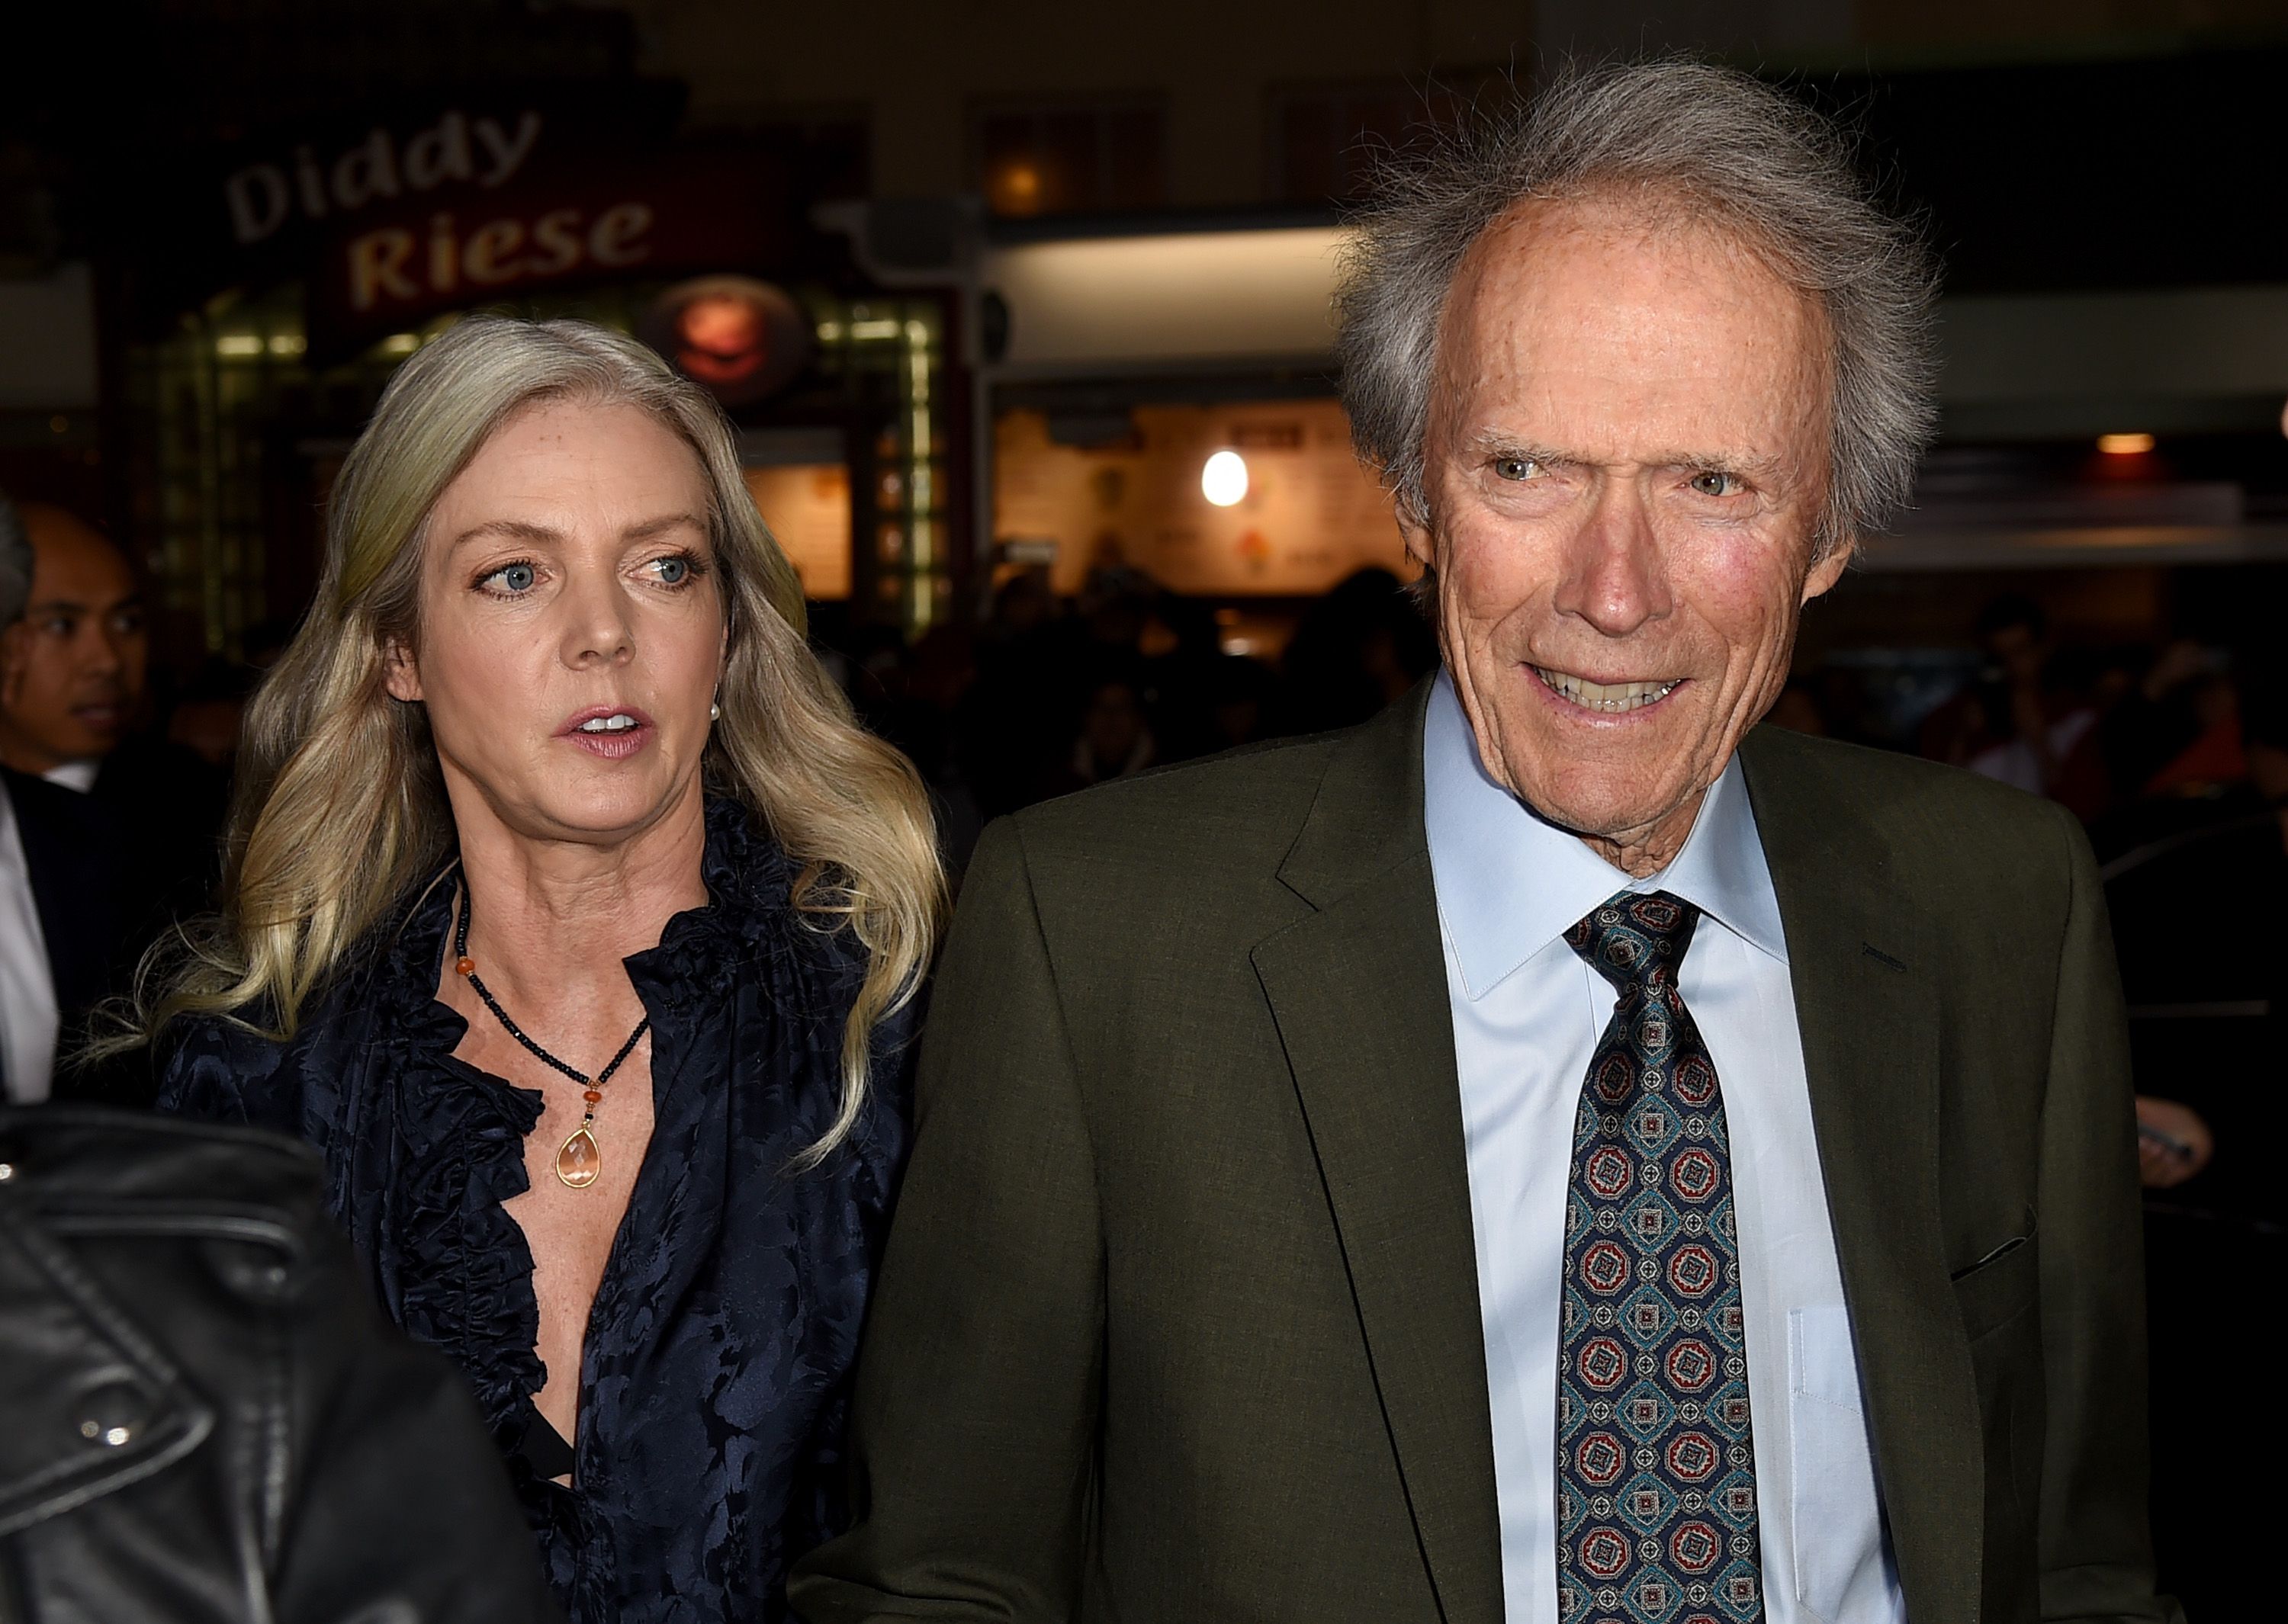 Christina Sandera (L) and Clint Eastwood arrive at the premiere of Warner Bros. Pictures' "The Mule" at the Village Theatre on December 10, 2018 | Photo: Getty Images